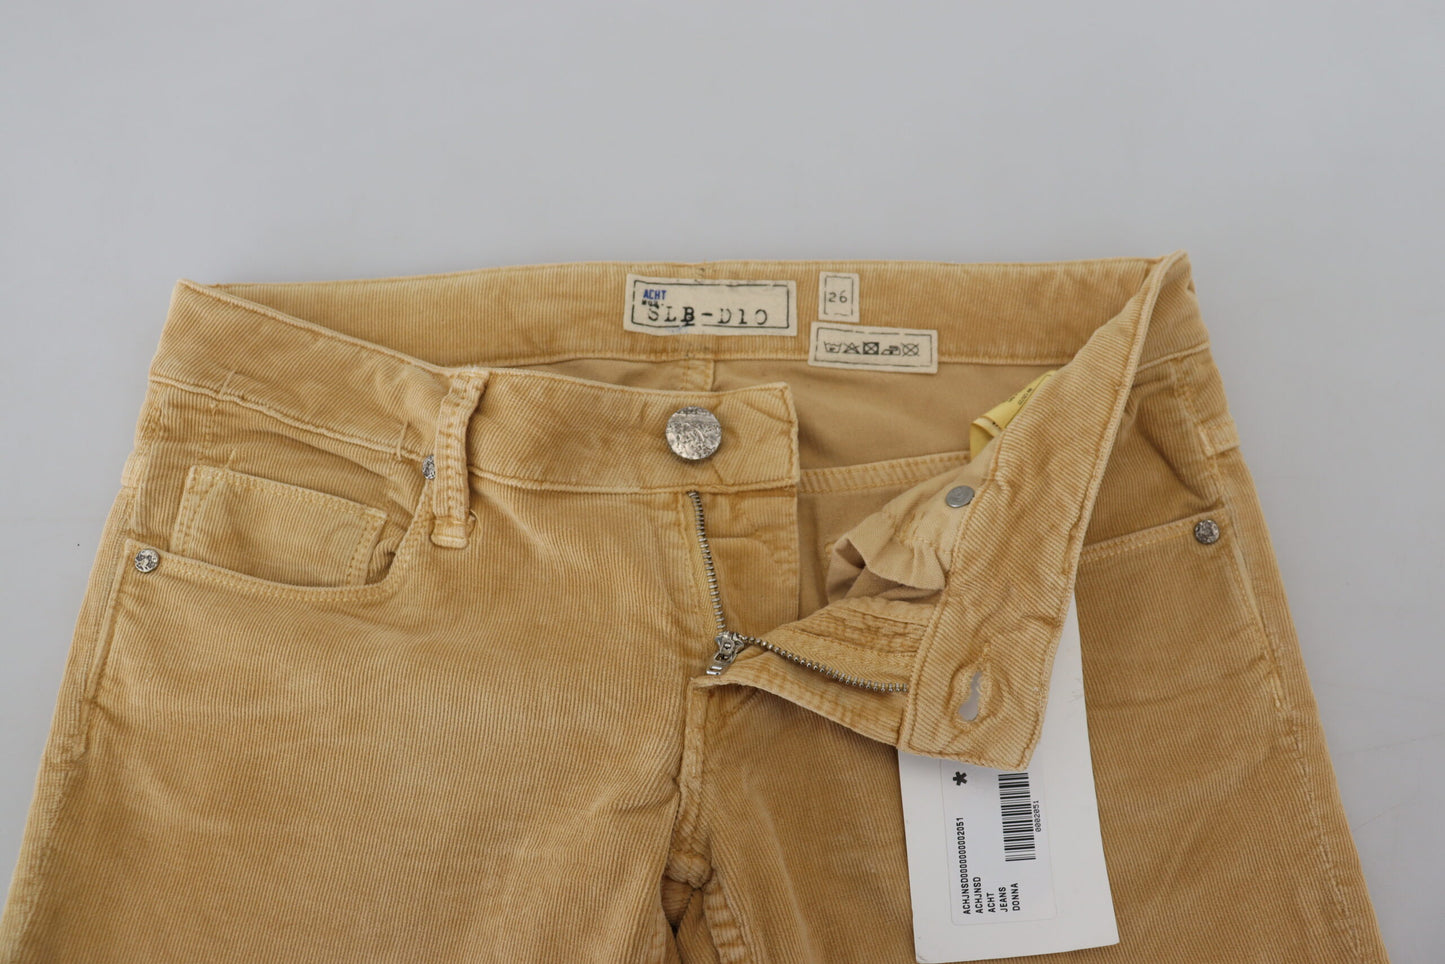 Acht Brown Cotton Corduroy Low Waist Women Casual Jeans - Designed by Acht Available to Buy at a Discounted Price on Moon Behind The Hill Online Designer Discount Store